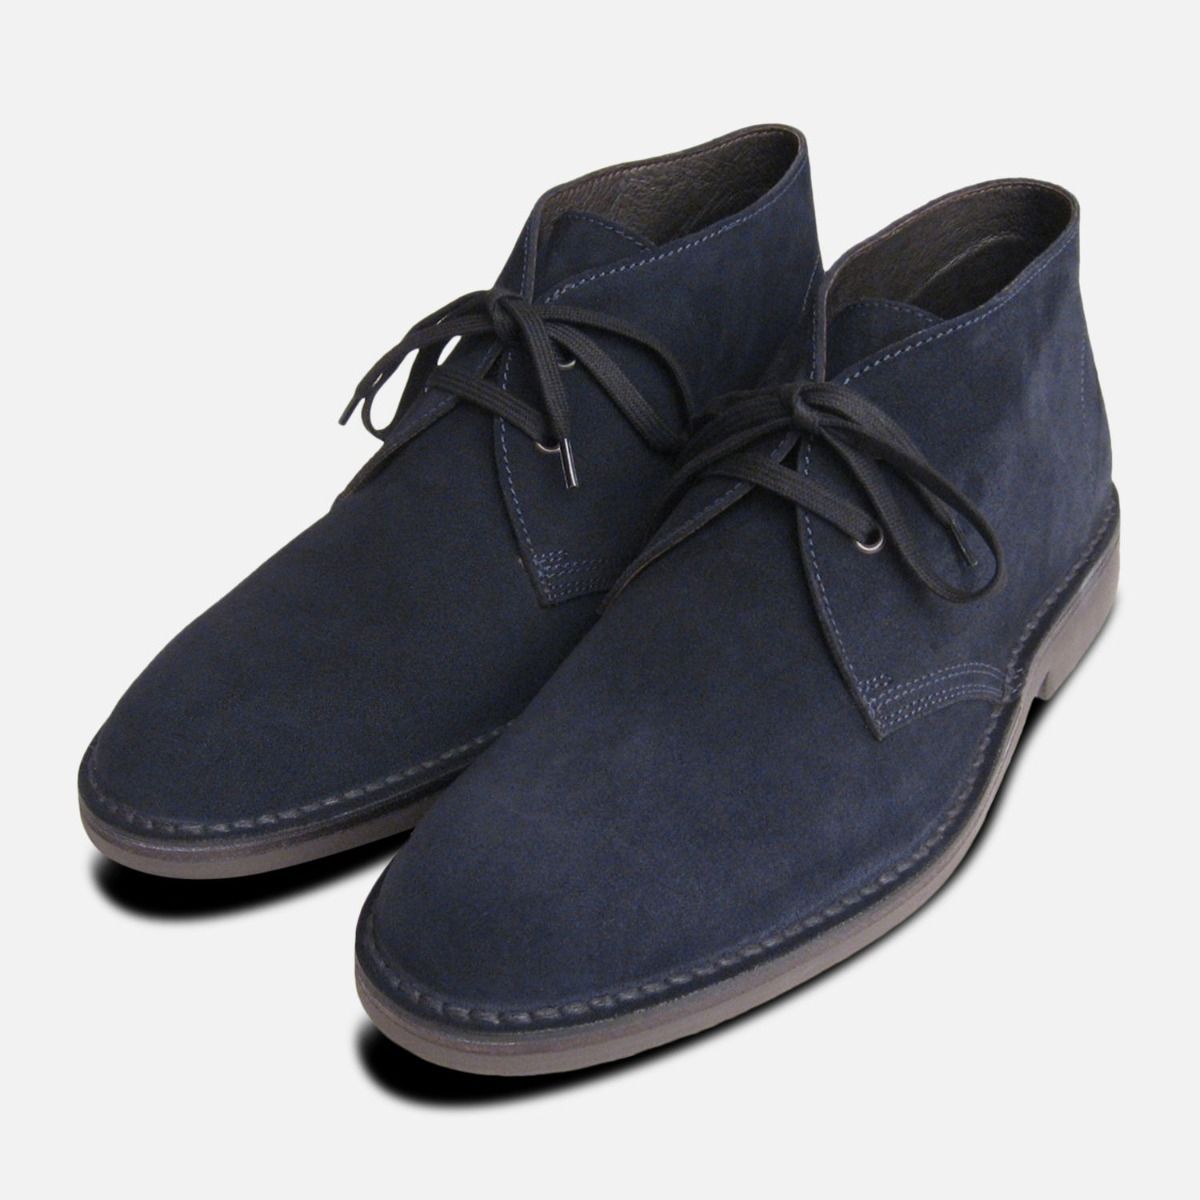 Mens Desert Boots Stitching Detail Navy Suede Rounded Toe Smart Casual Shoes